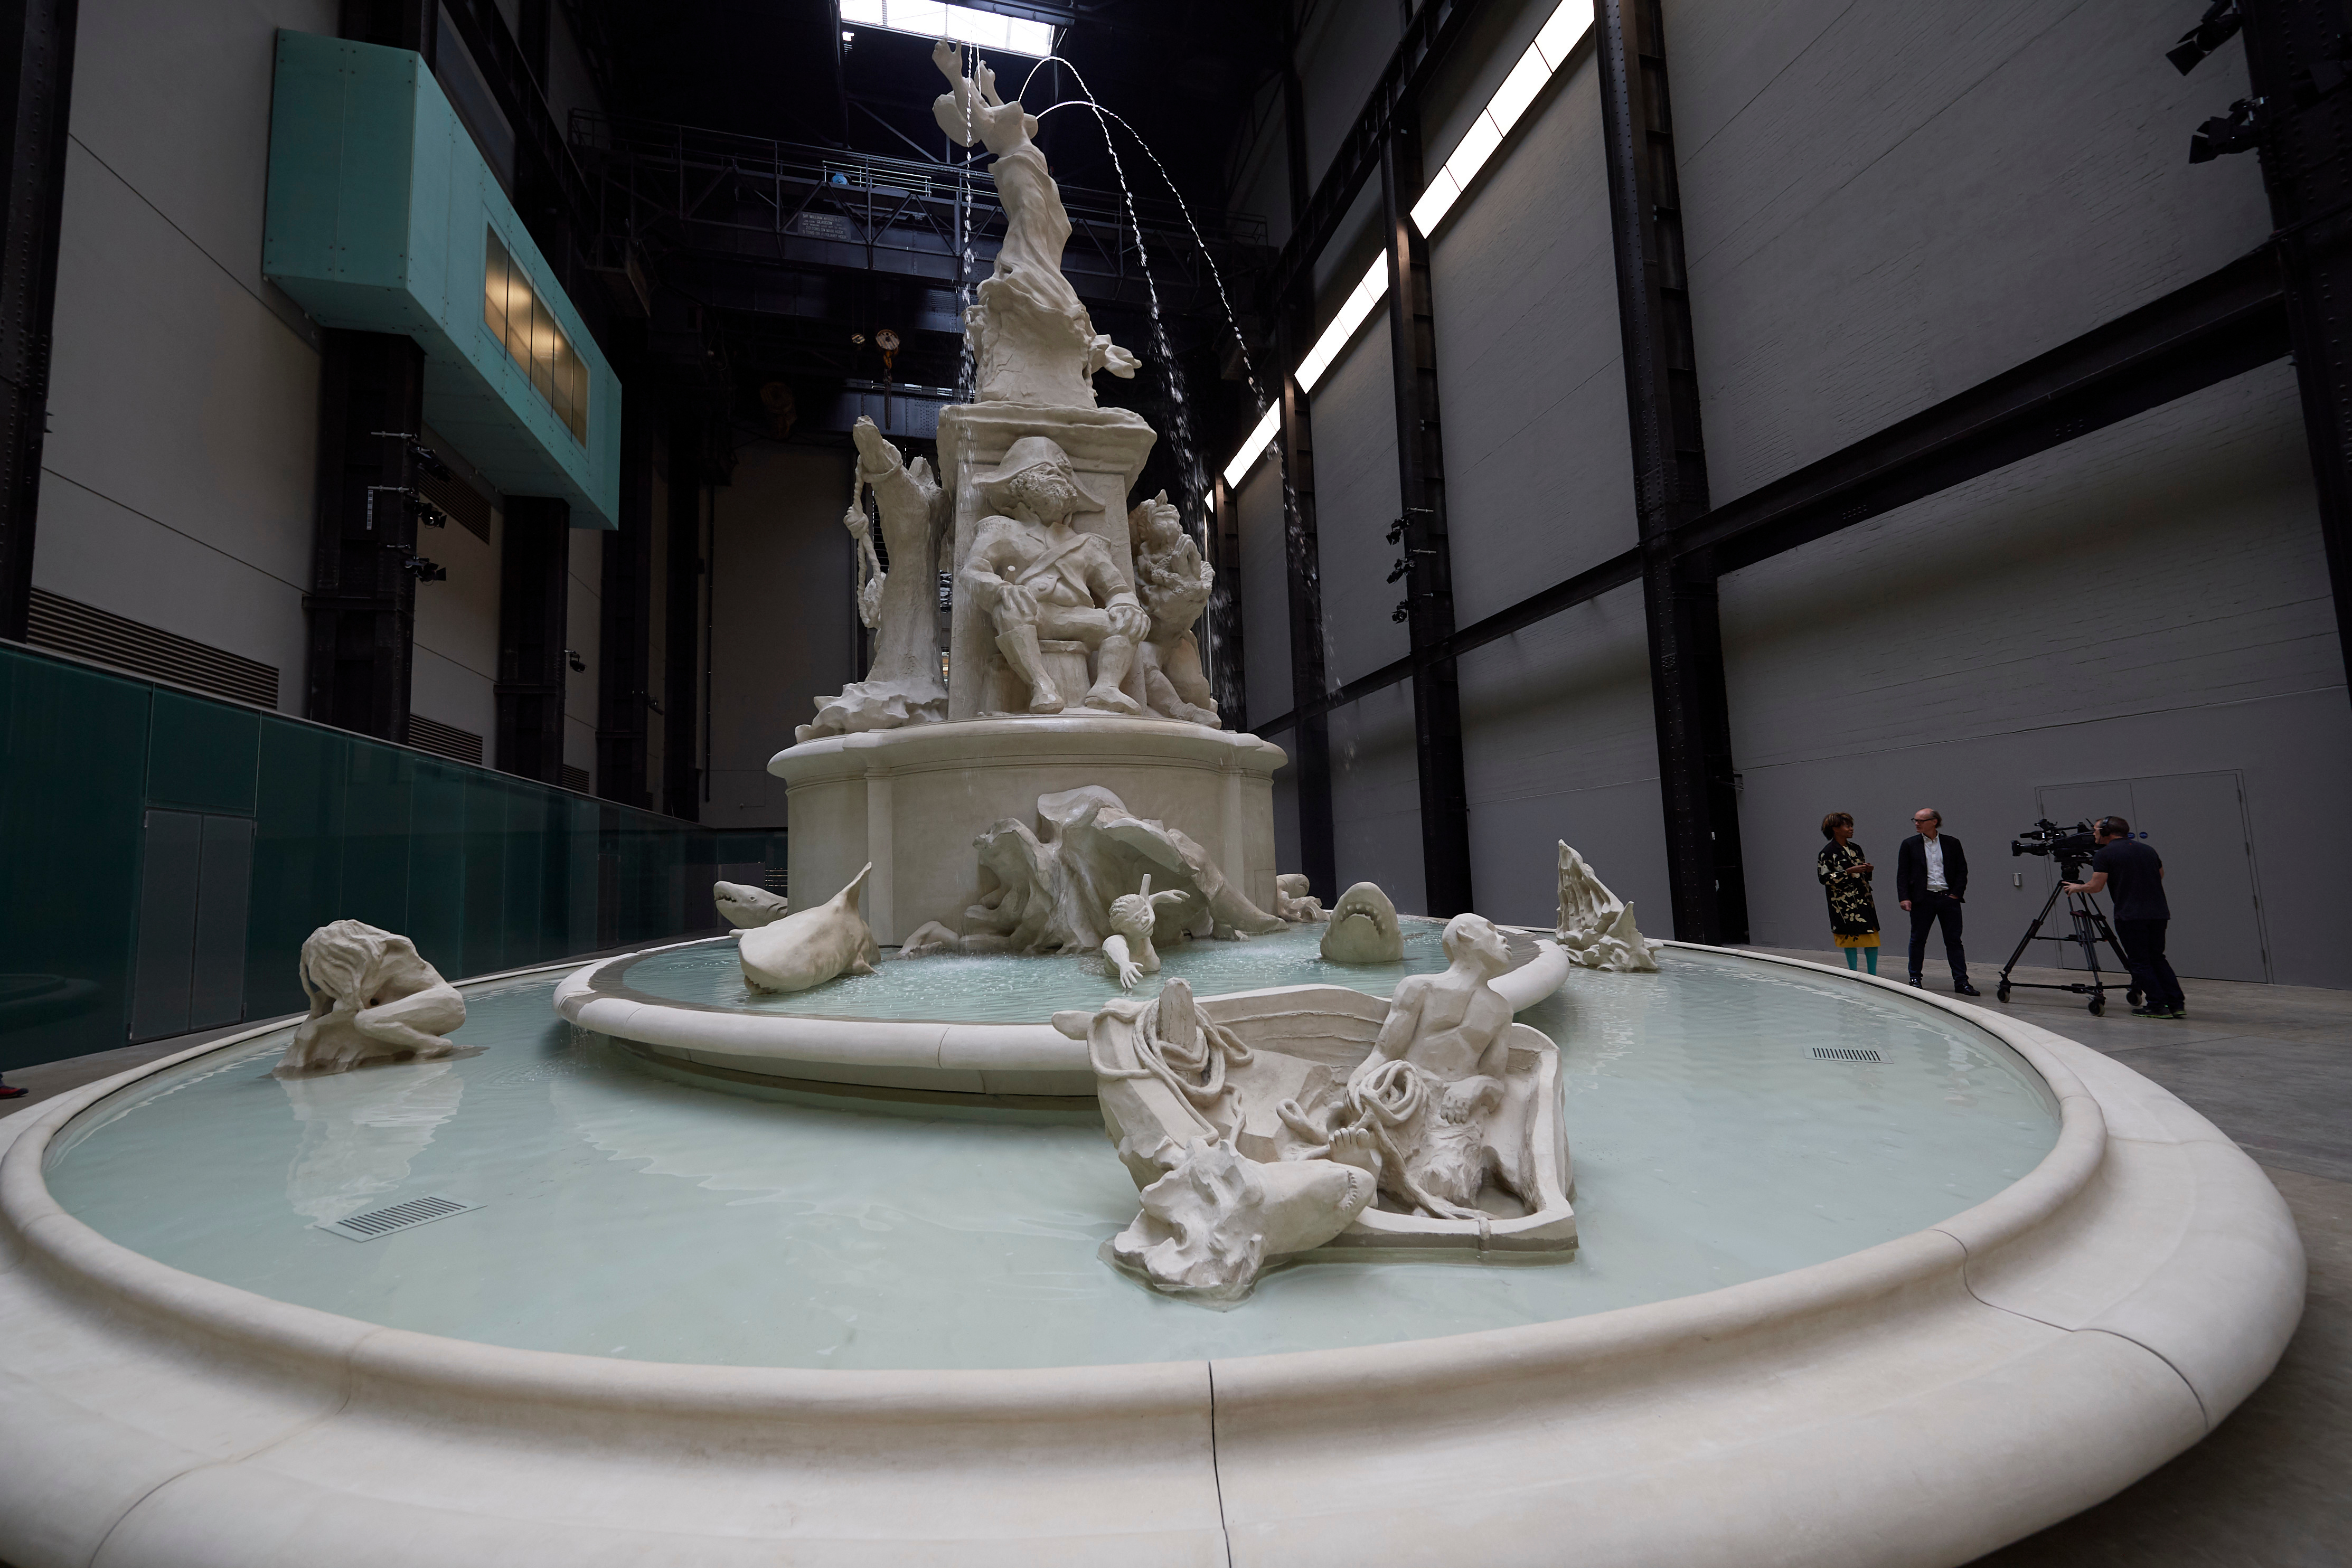 Artist Kara Walker has gifted the UK a huge fountain to remind us of its role in the slave trade